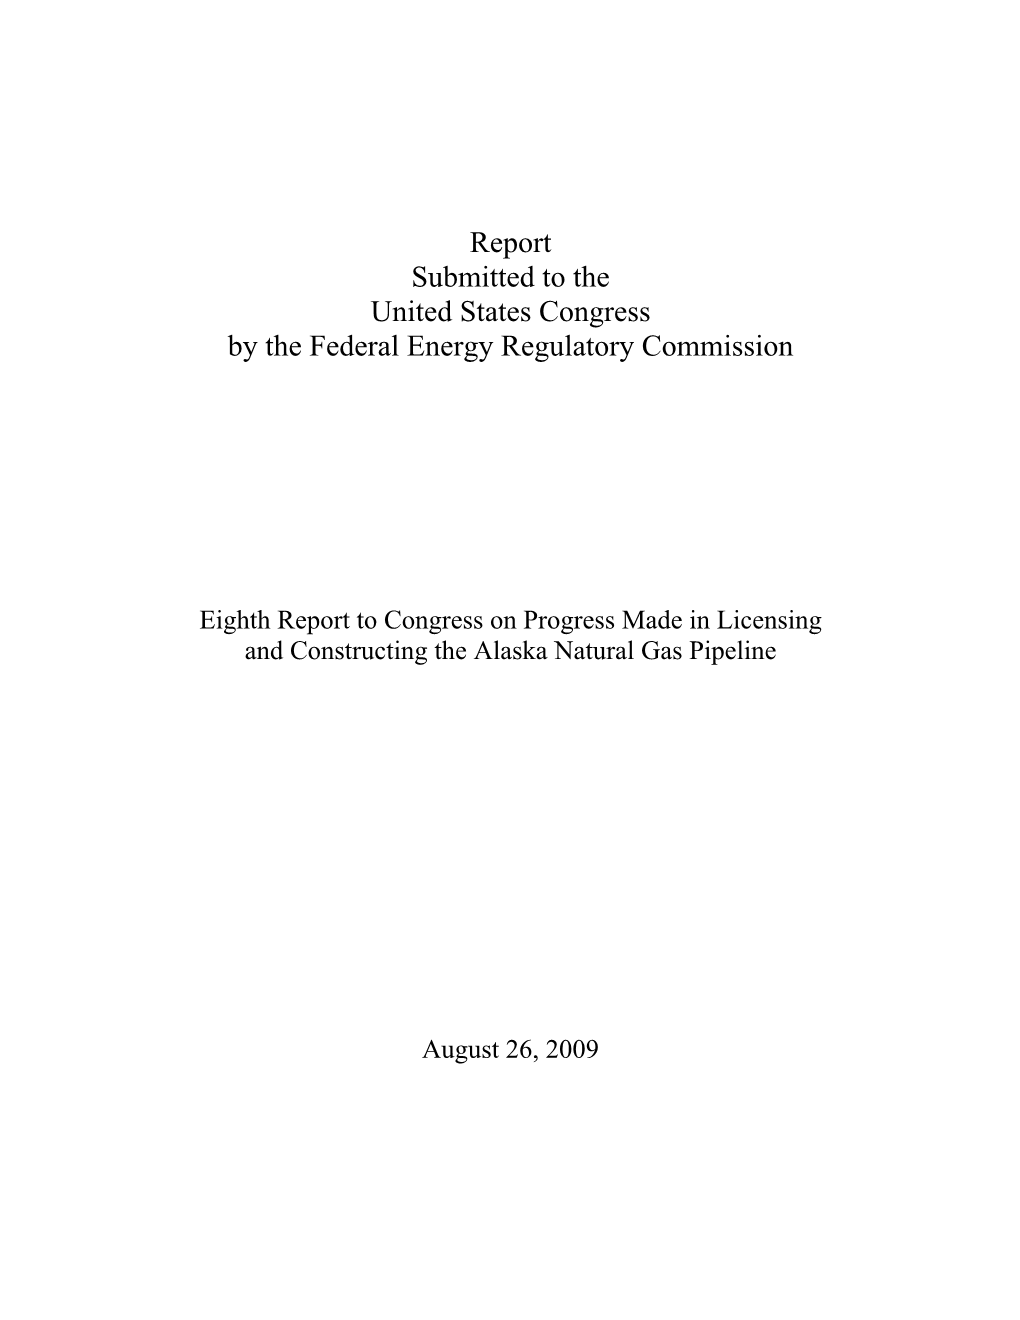 Eighth Report to Congress on the Alaska Pipeline